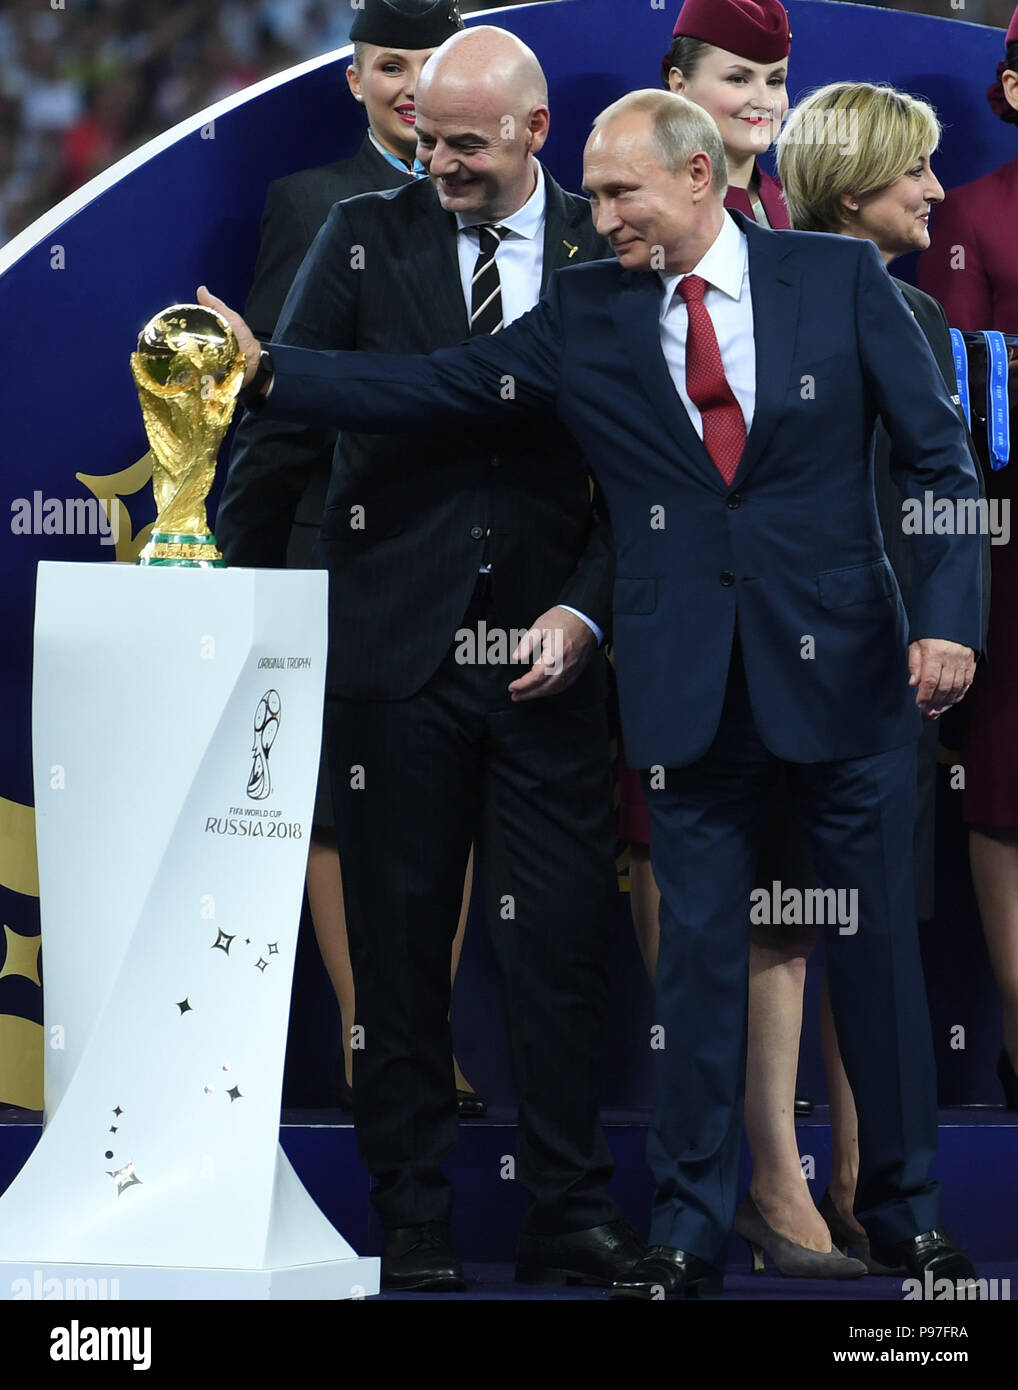 A ceremony to unveil Louis Vuitton's travel case for the 2018 FIFA World Cup  trophy on May 17, 2018 in Paris, France. Photo by Alban  Wyters/ABACAPRESS.COM Stock Photo - Alamy